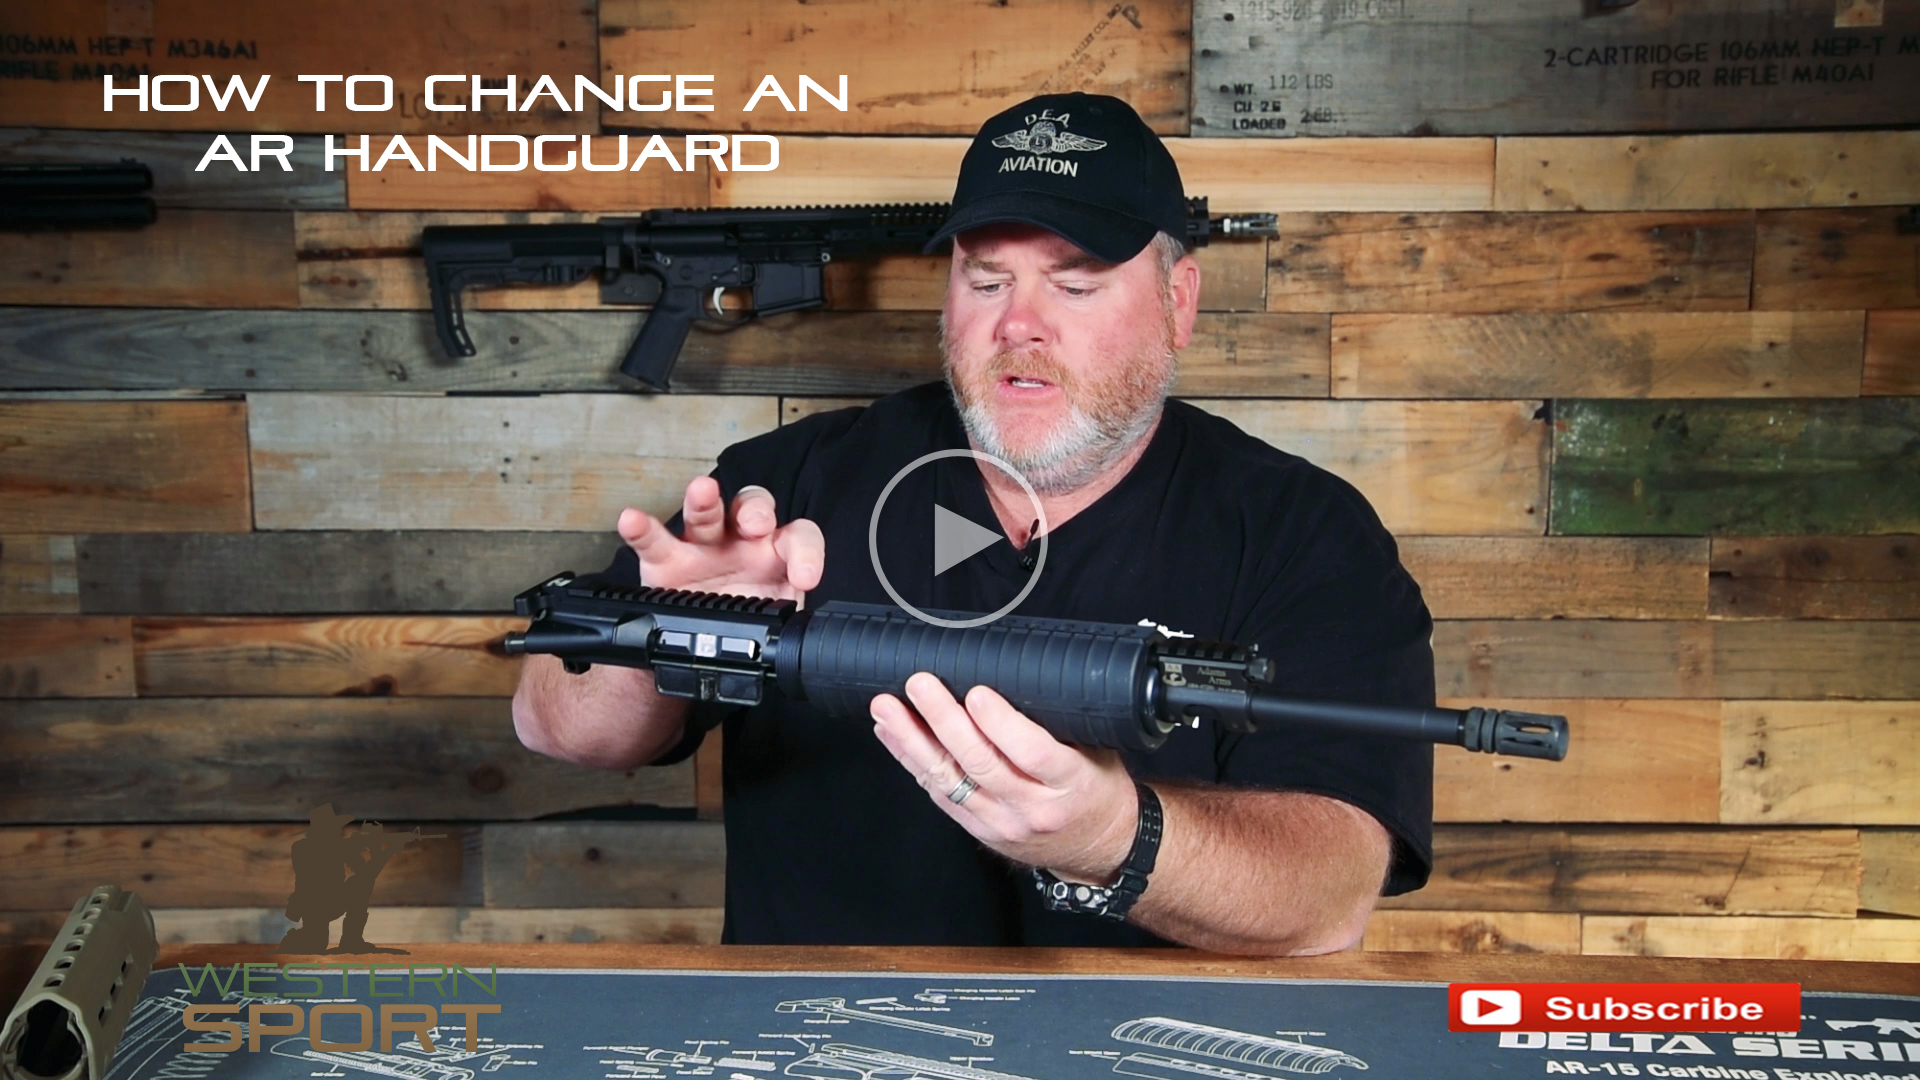 How to change and AR handguard youtube videos | western sport